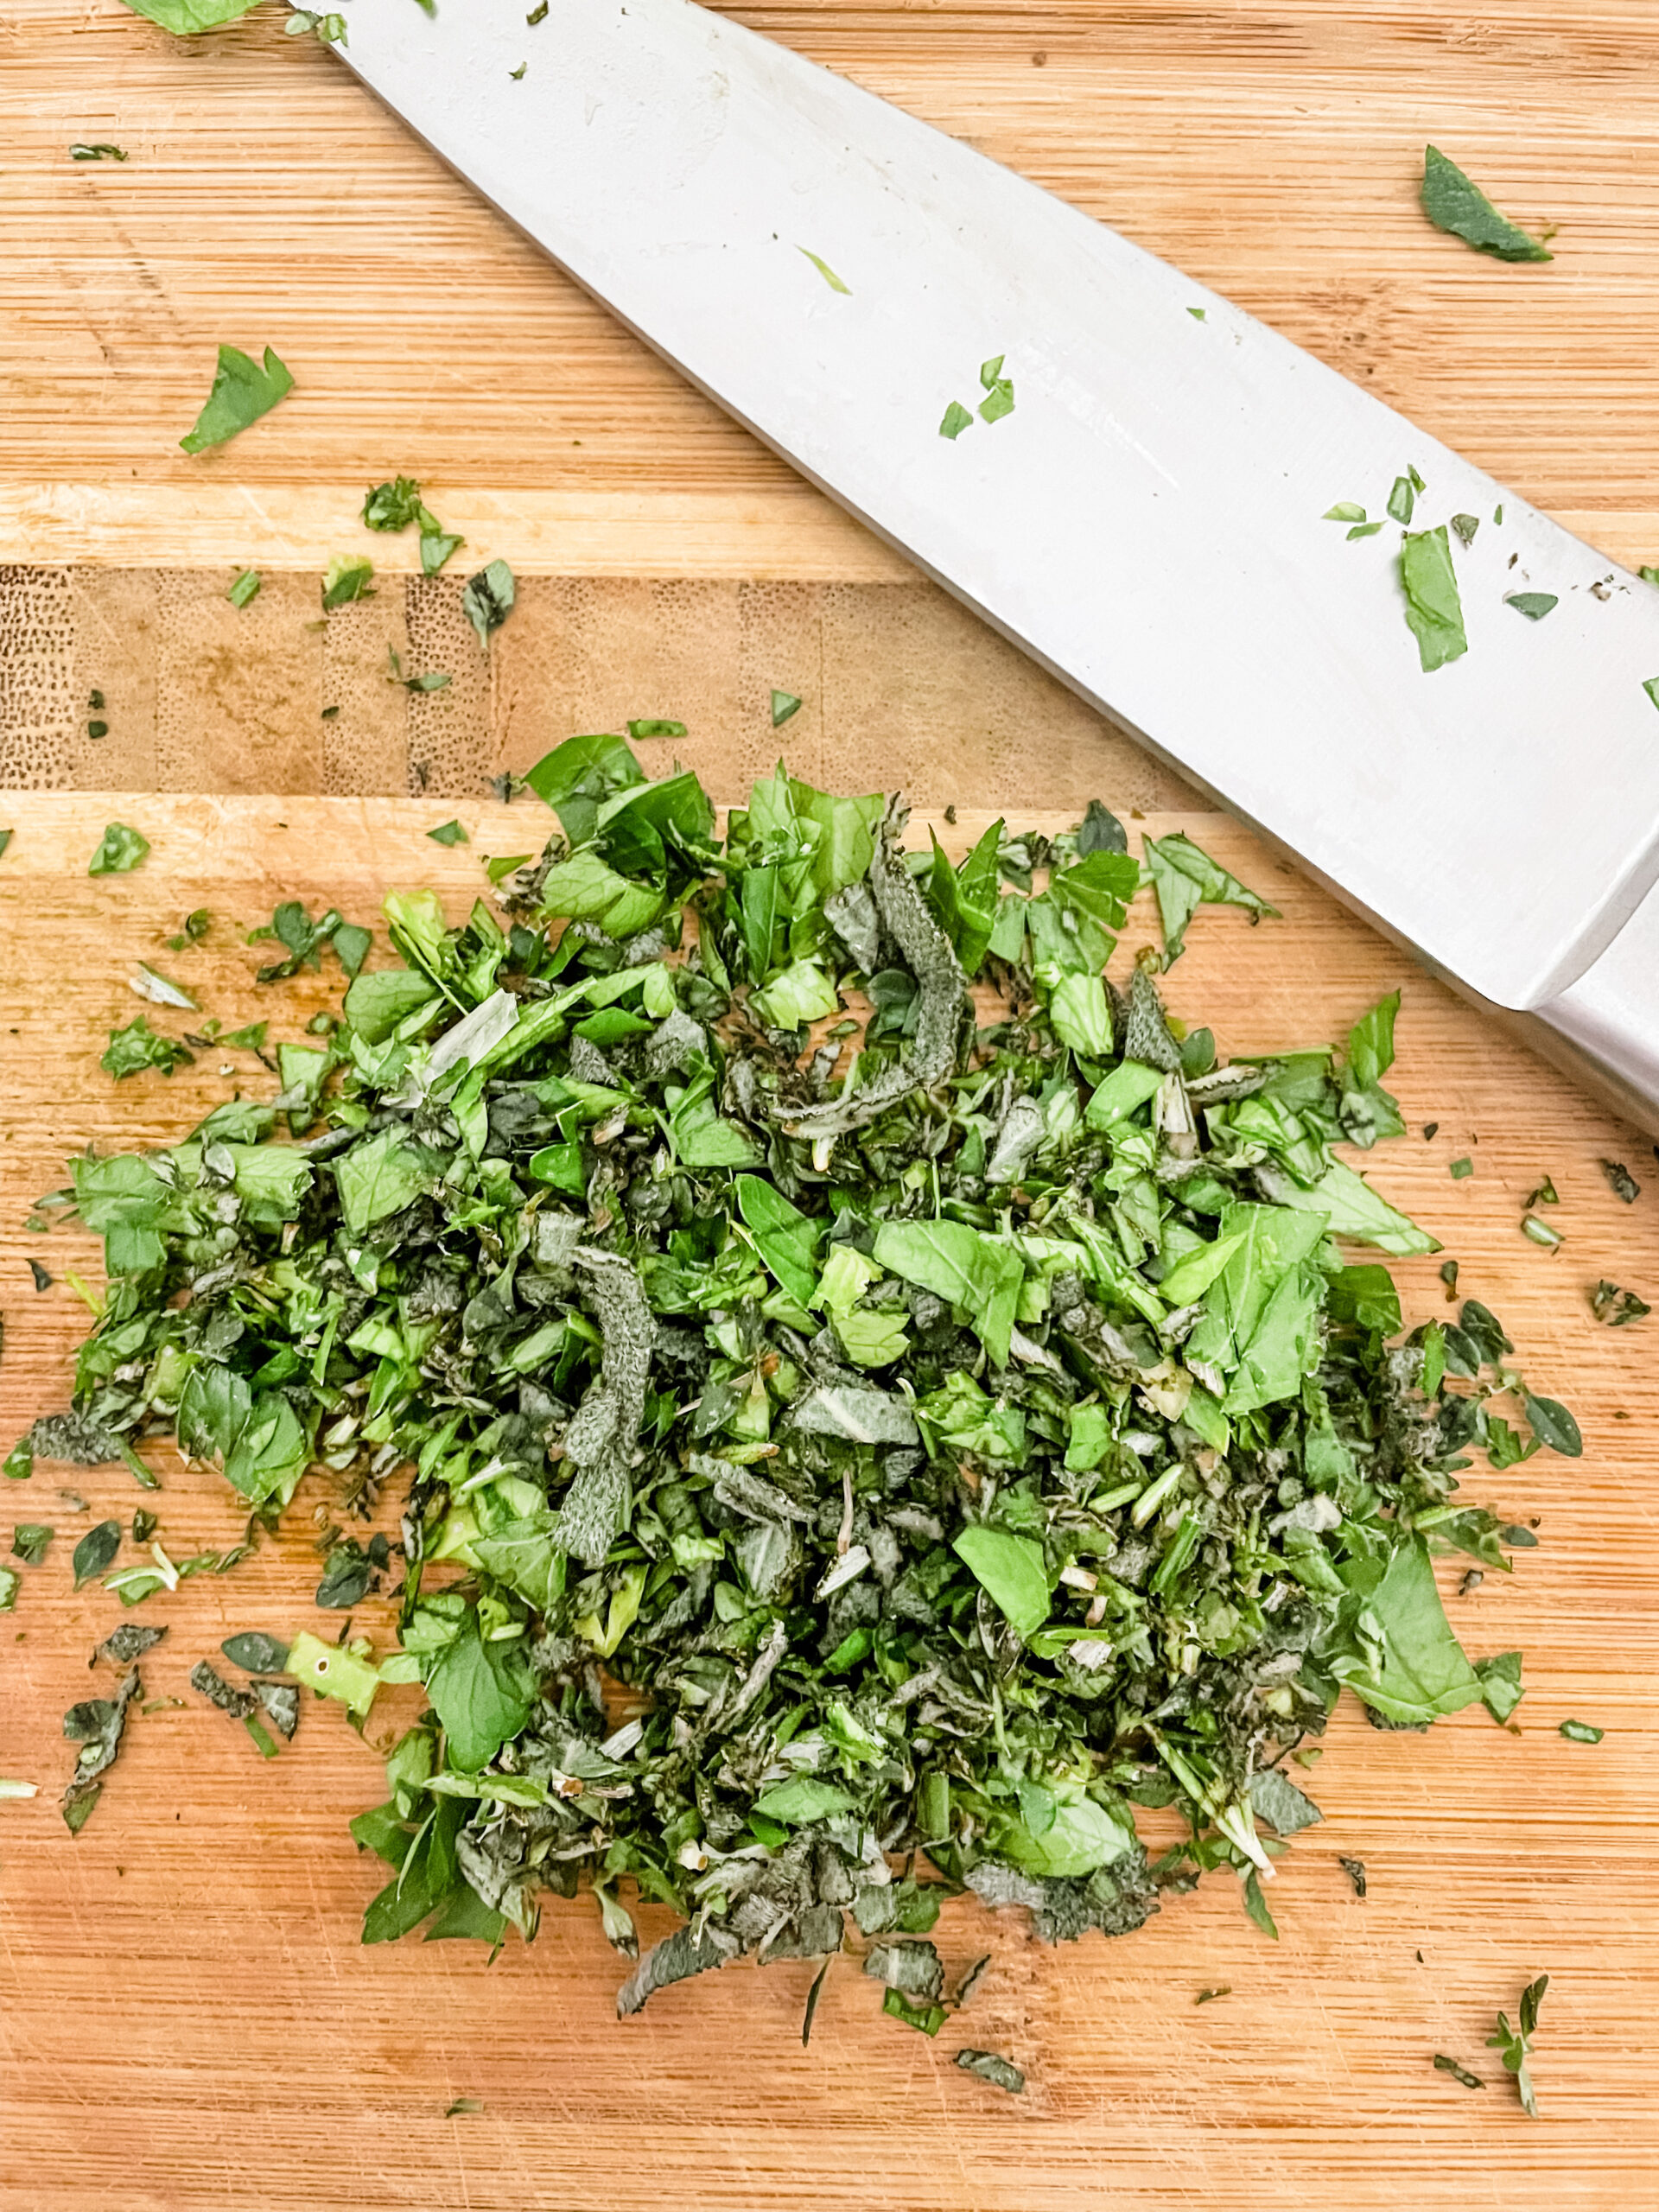 The finely chopped herbs